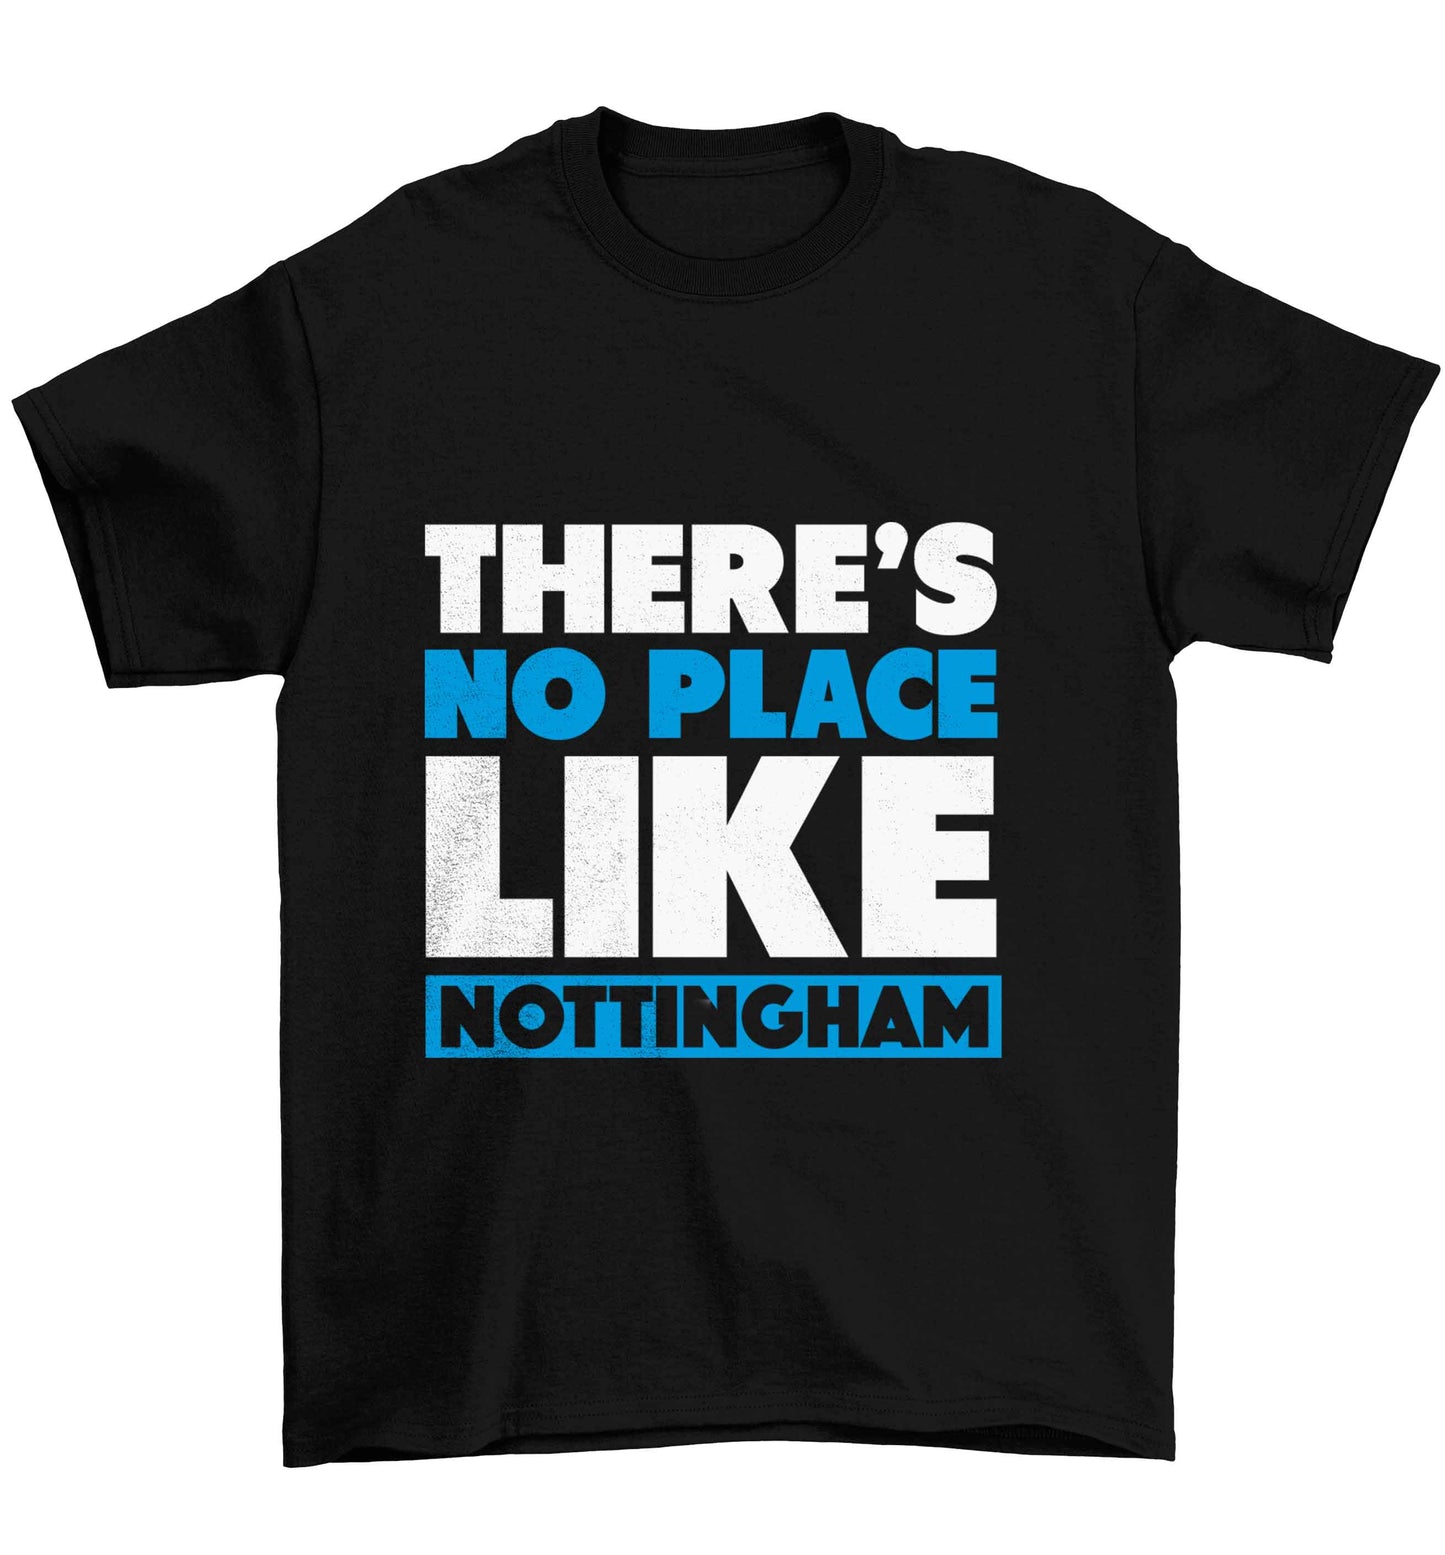 There's no place like Nottingham Children's black Tshirt 12-13 Years